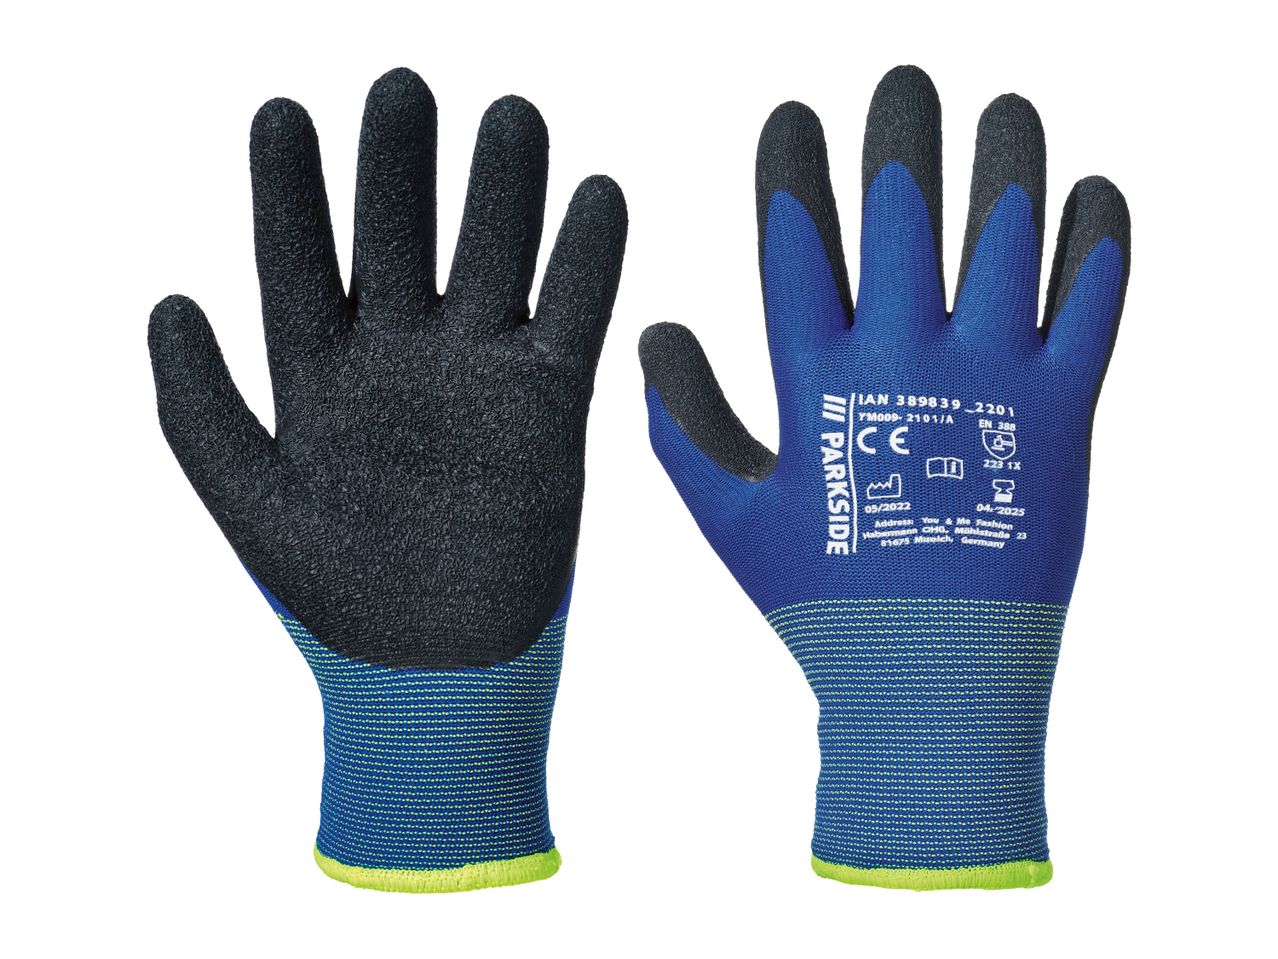 Go to full screen view: PARKSIDE Lined Work Gloves - Image 1